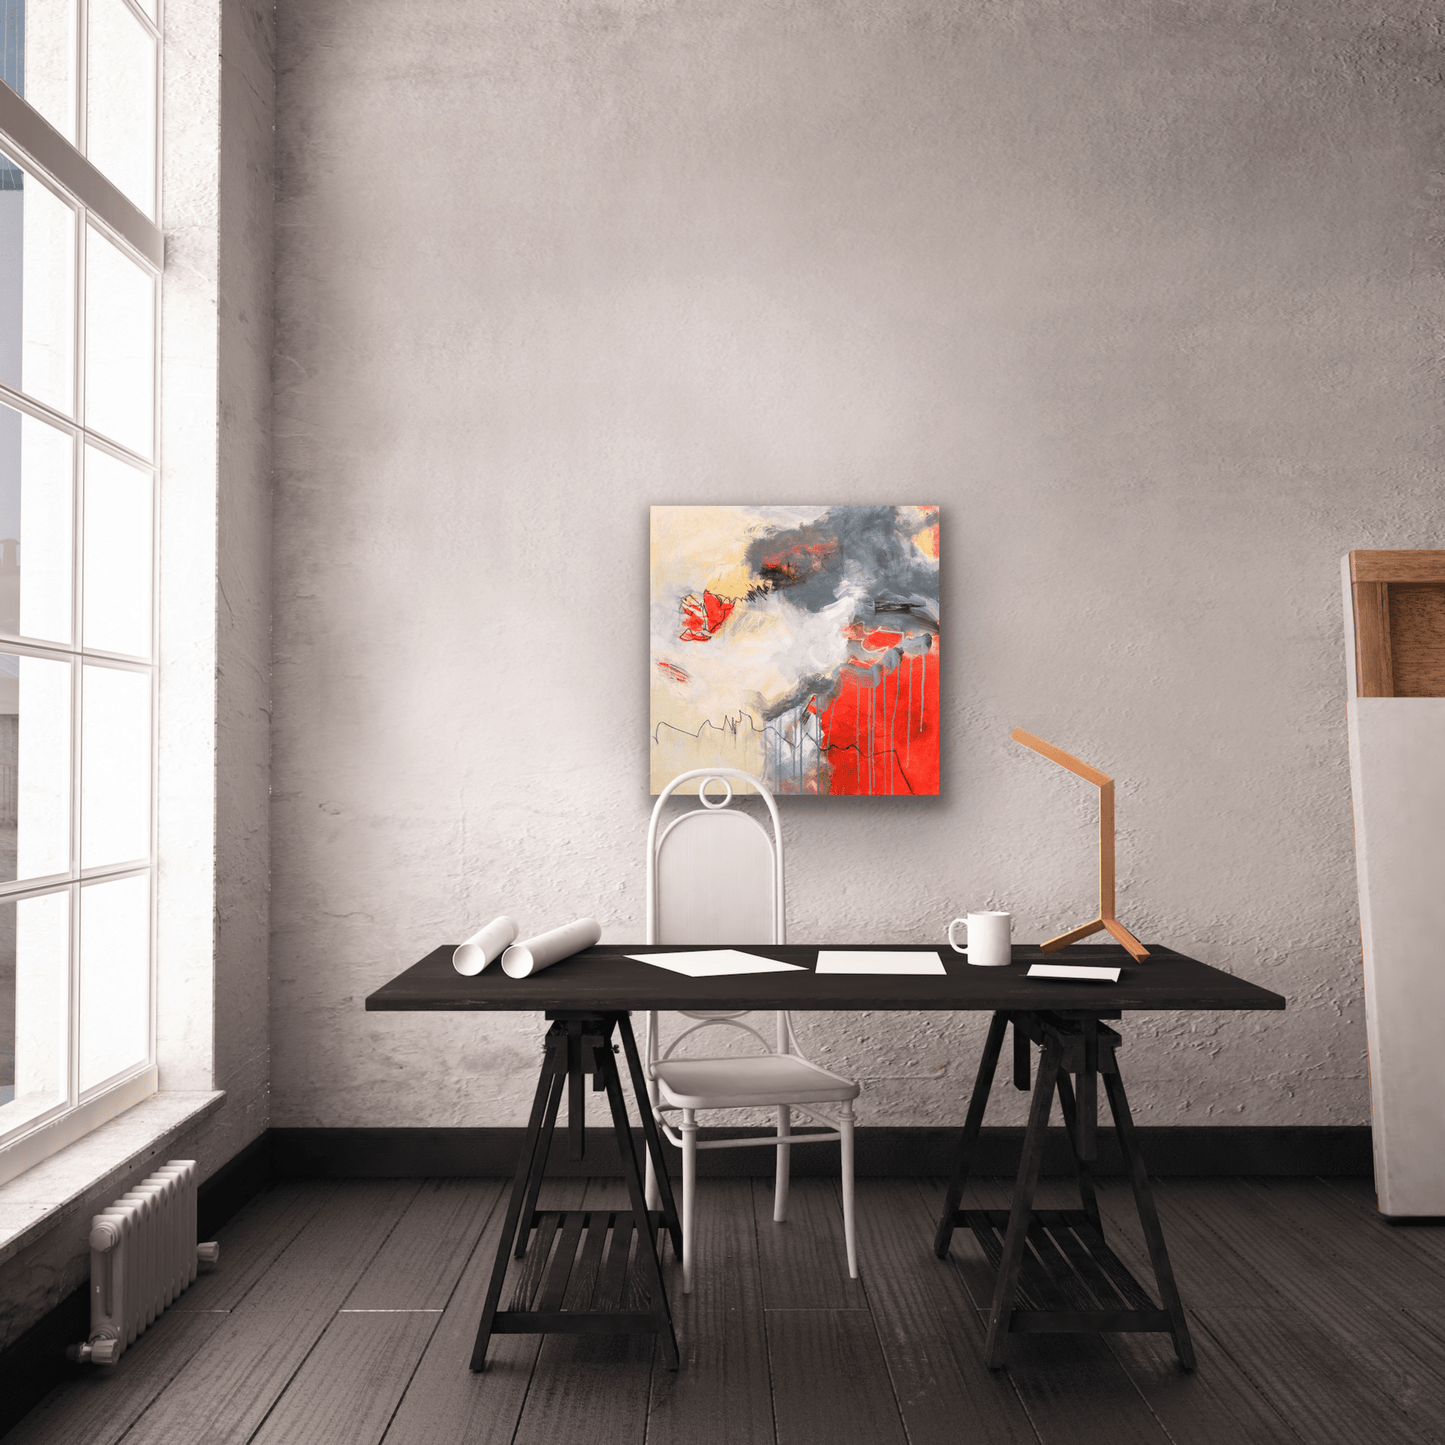 This work of art with it abstract composition and lively colour shoul dbe placed in a room where you want to make a statement.